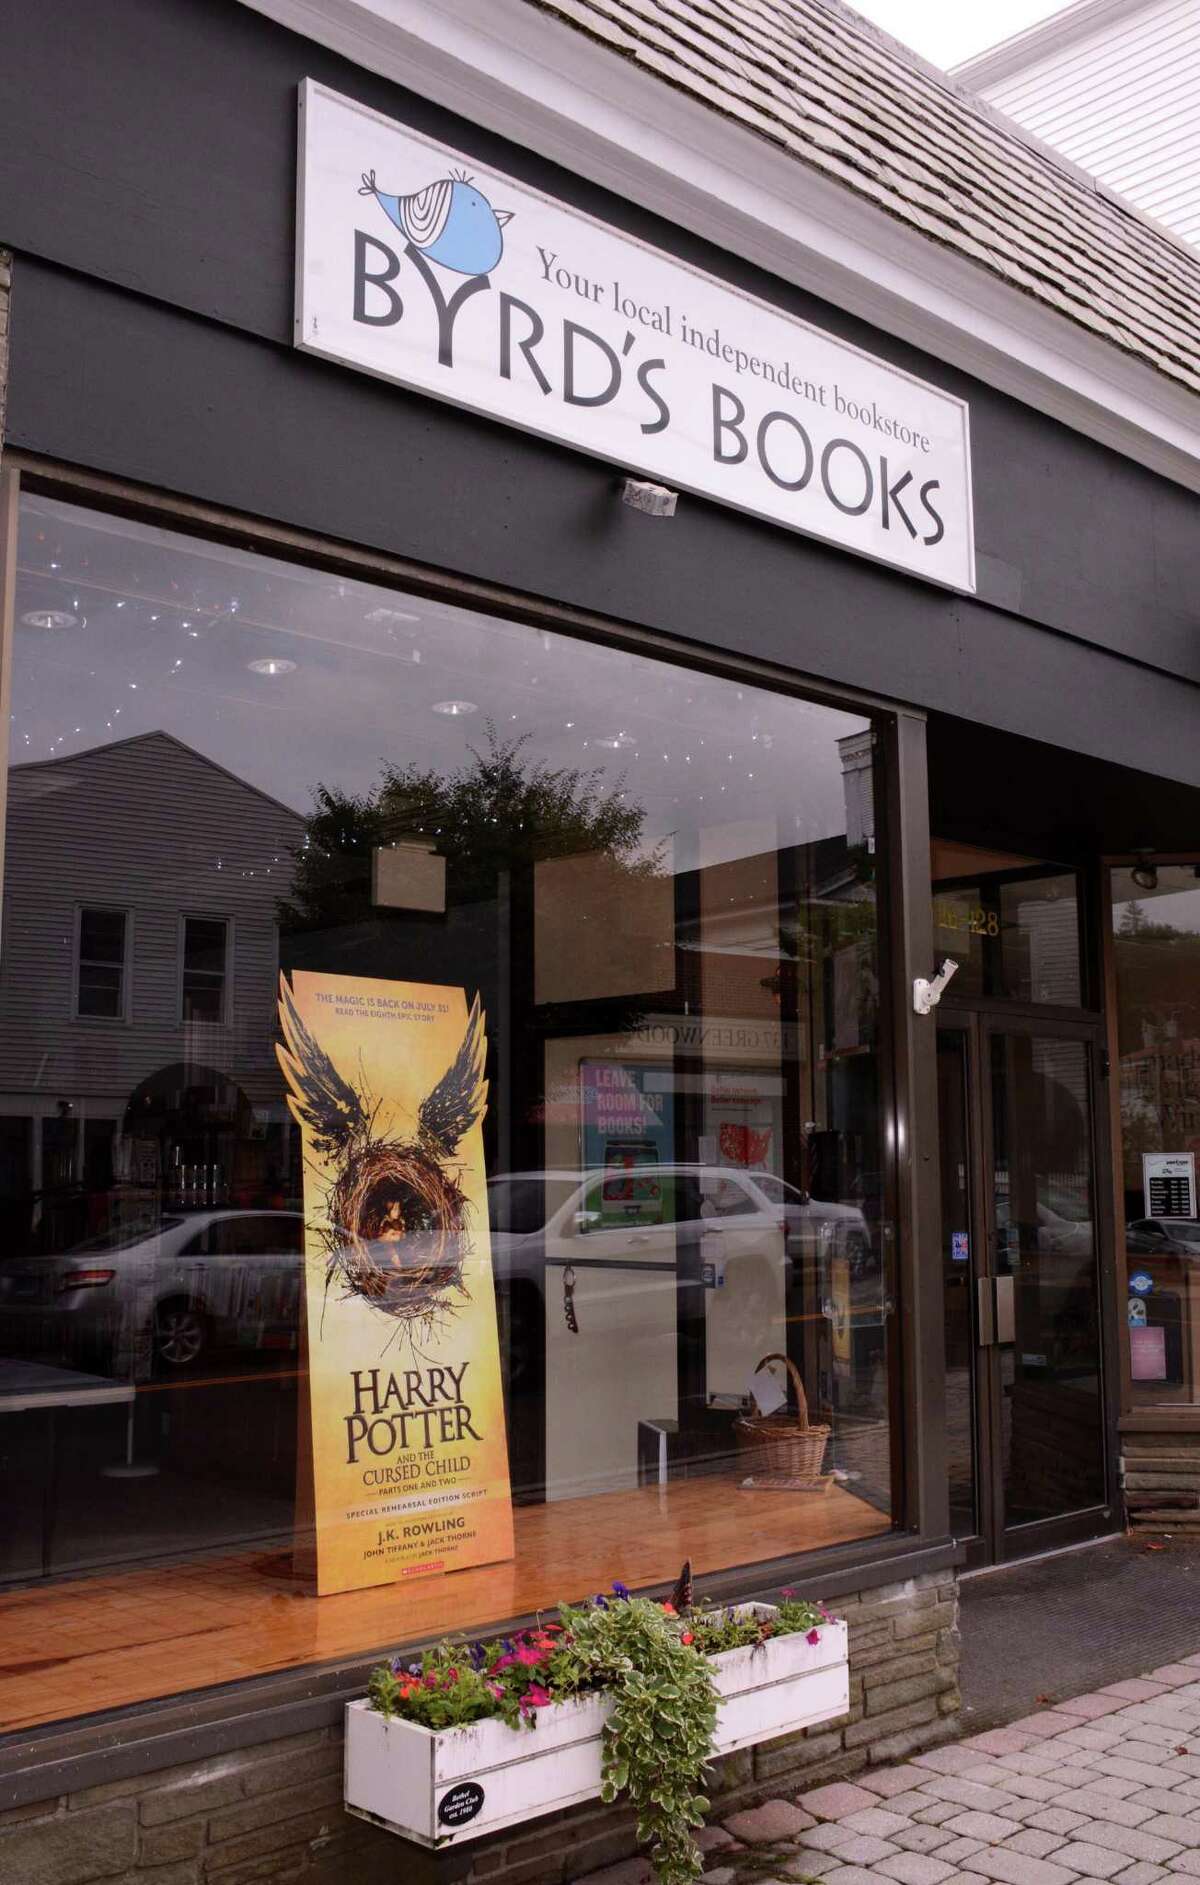 Byrd's Books in Bethel opened early on Sunday, July 31, 2016 for Harry Potter fans to get their copy of the newly released book, "Harry Potter and the Cursed Child".